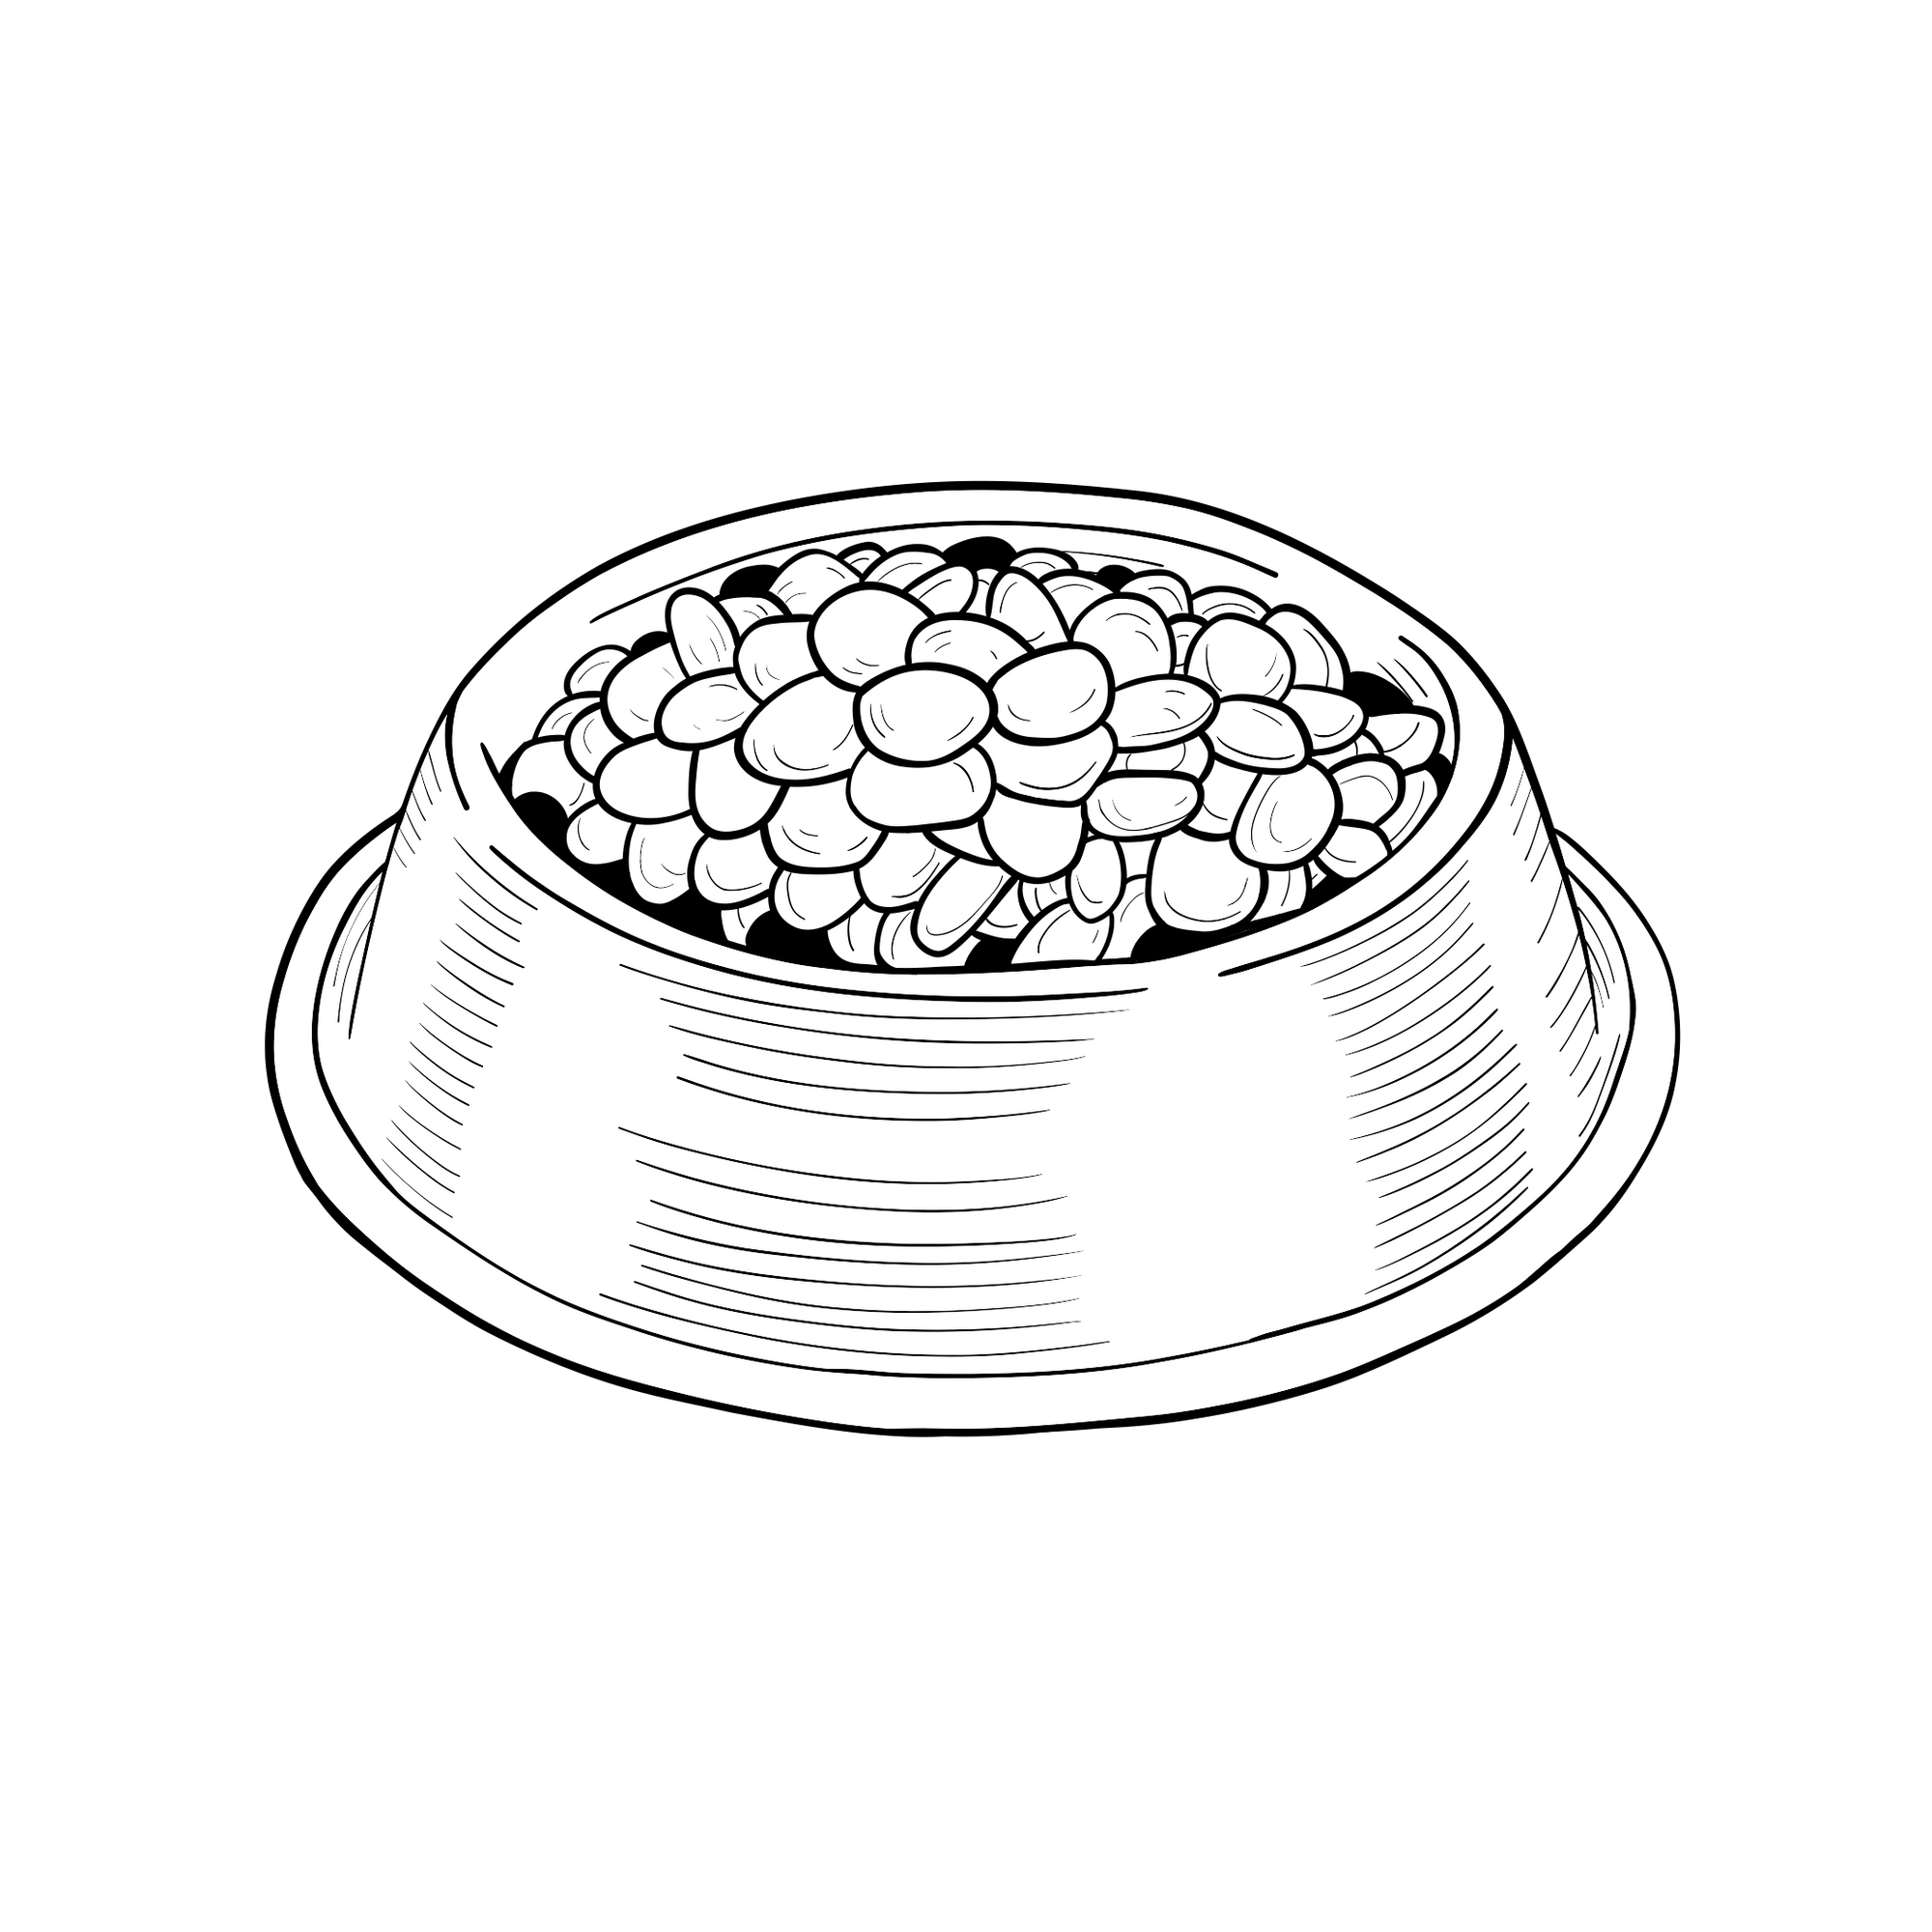 Line drawing of a bowl of food, filled with kibble.